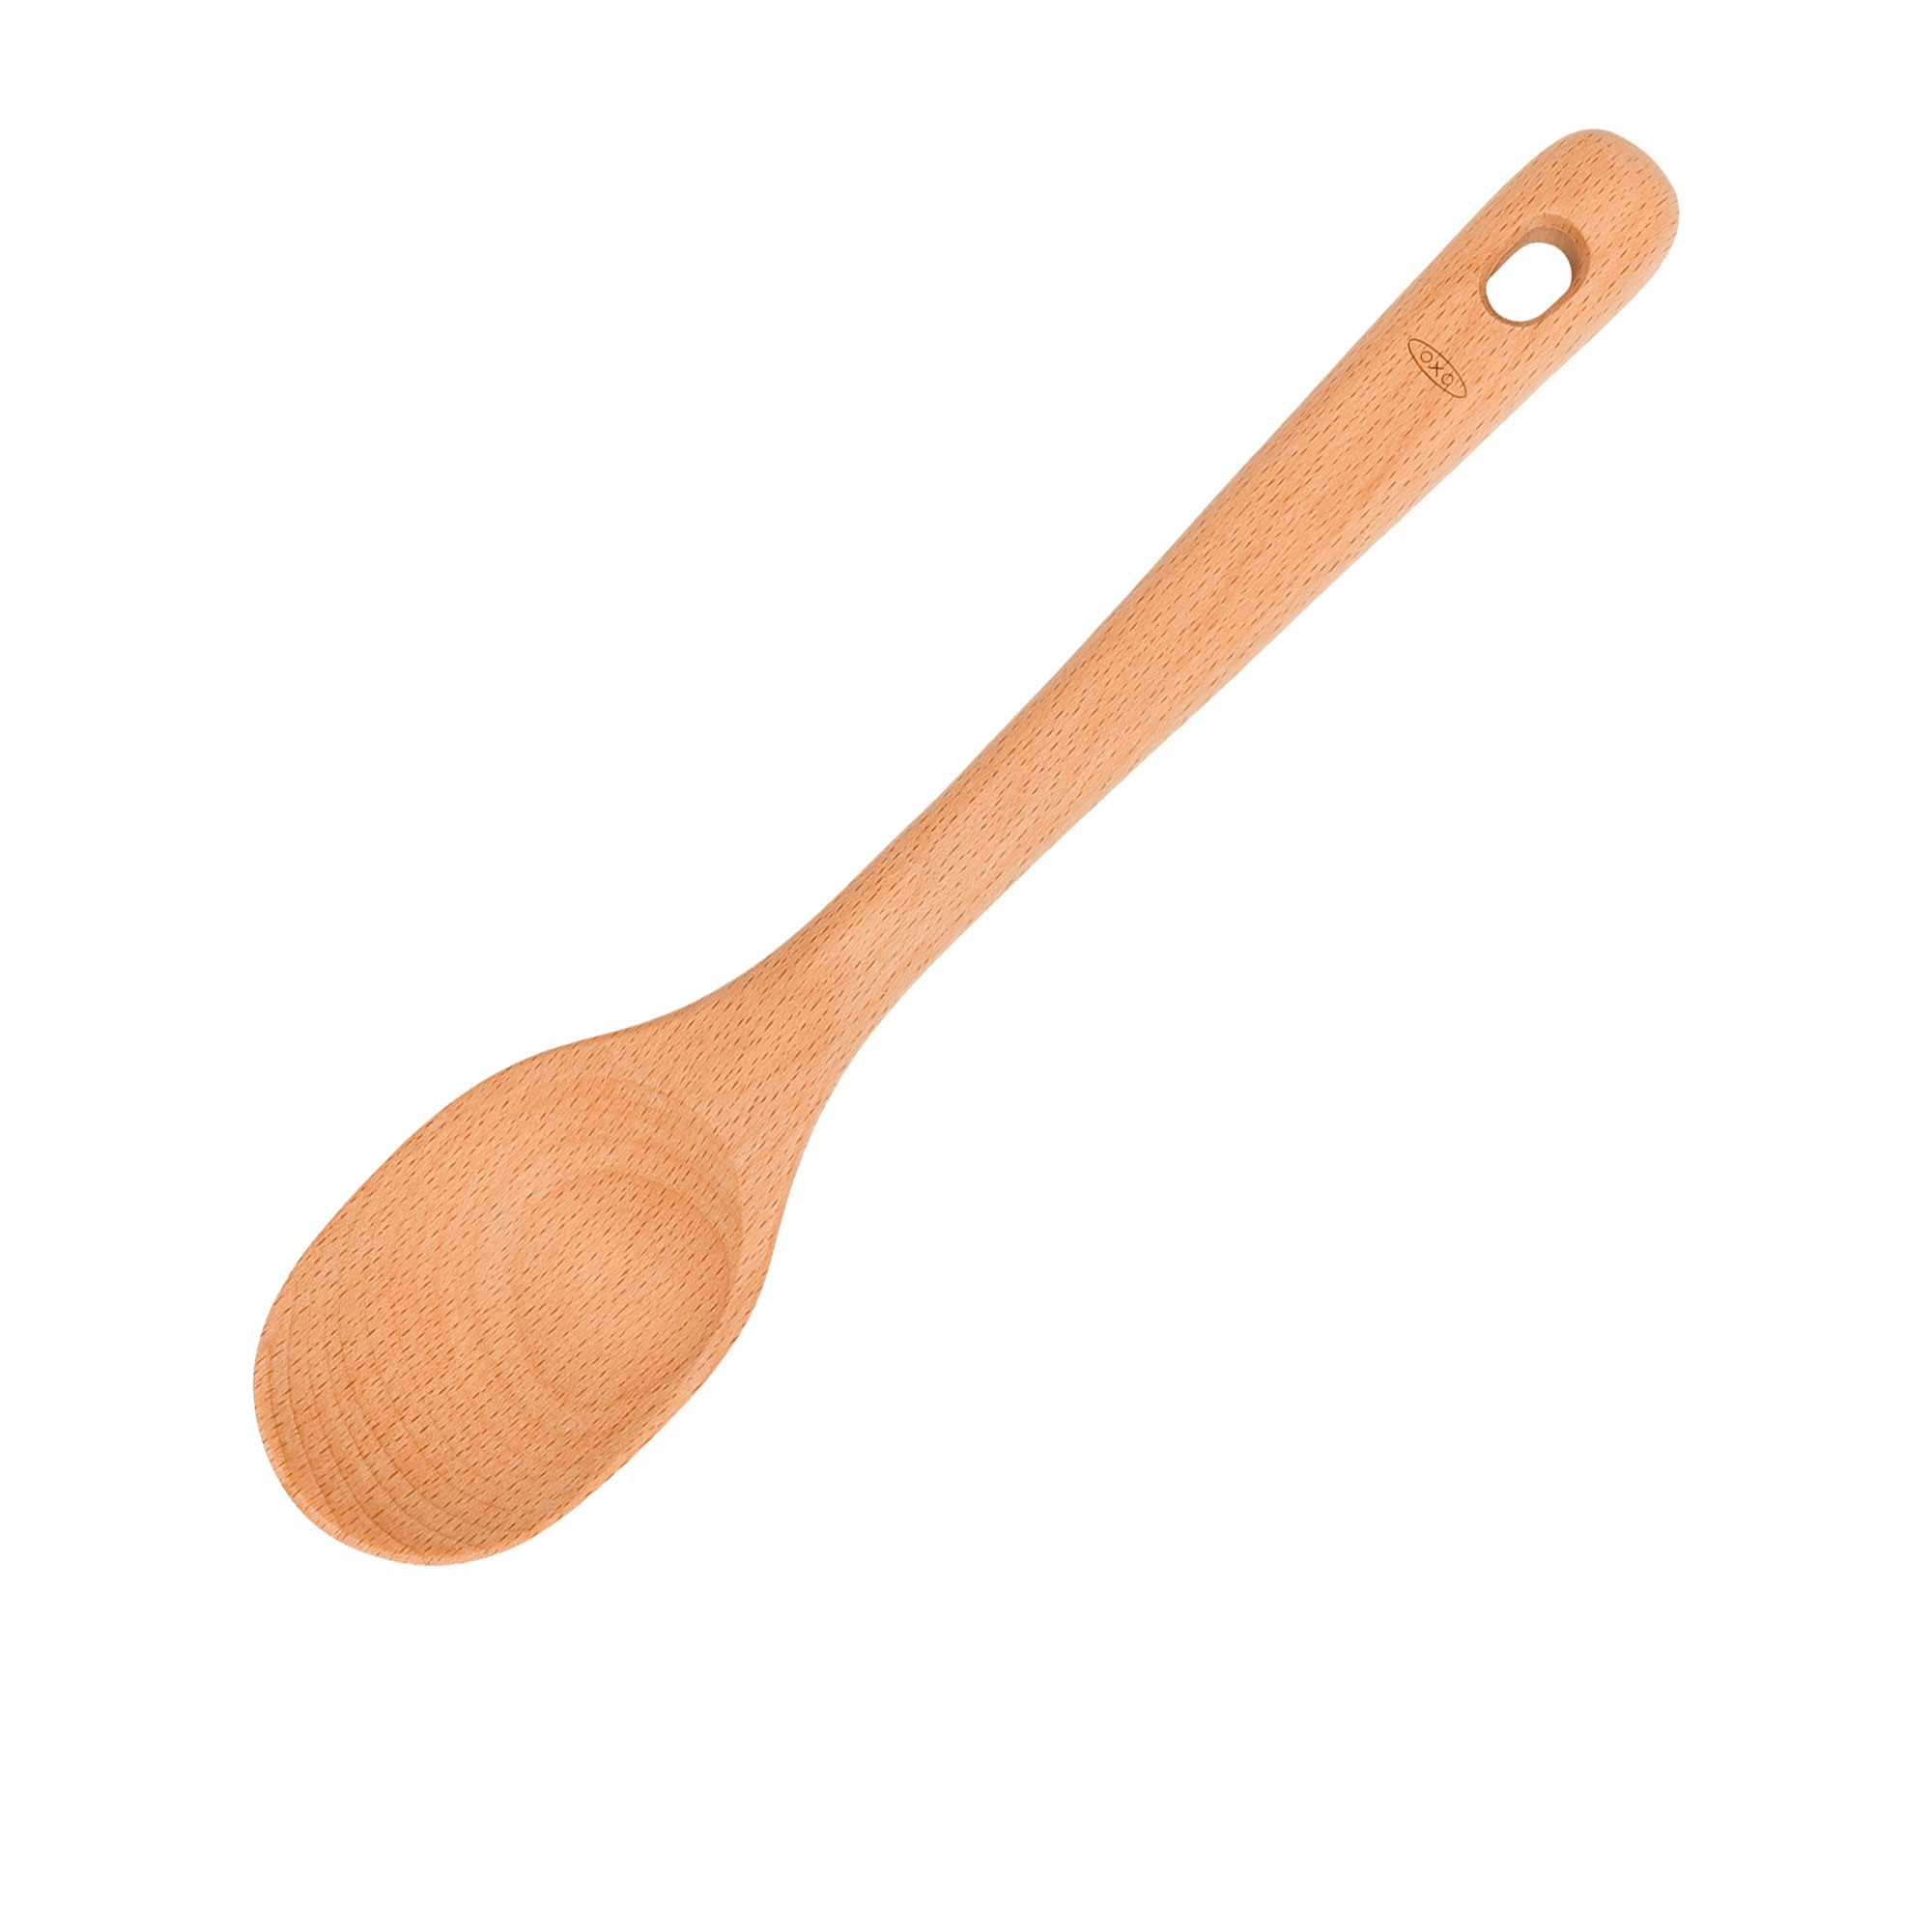 OXO Good Grips Wooden Spoon Large Image 1